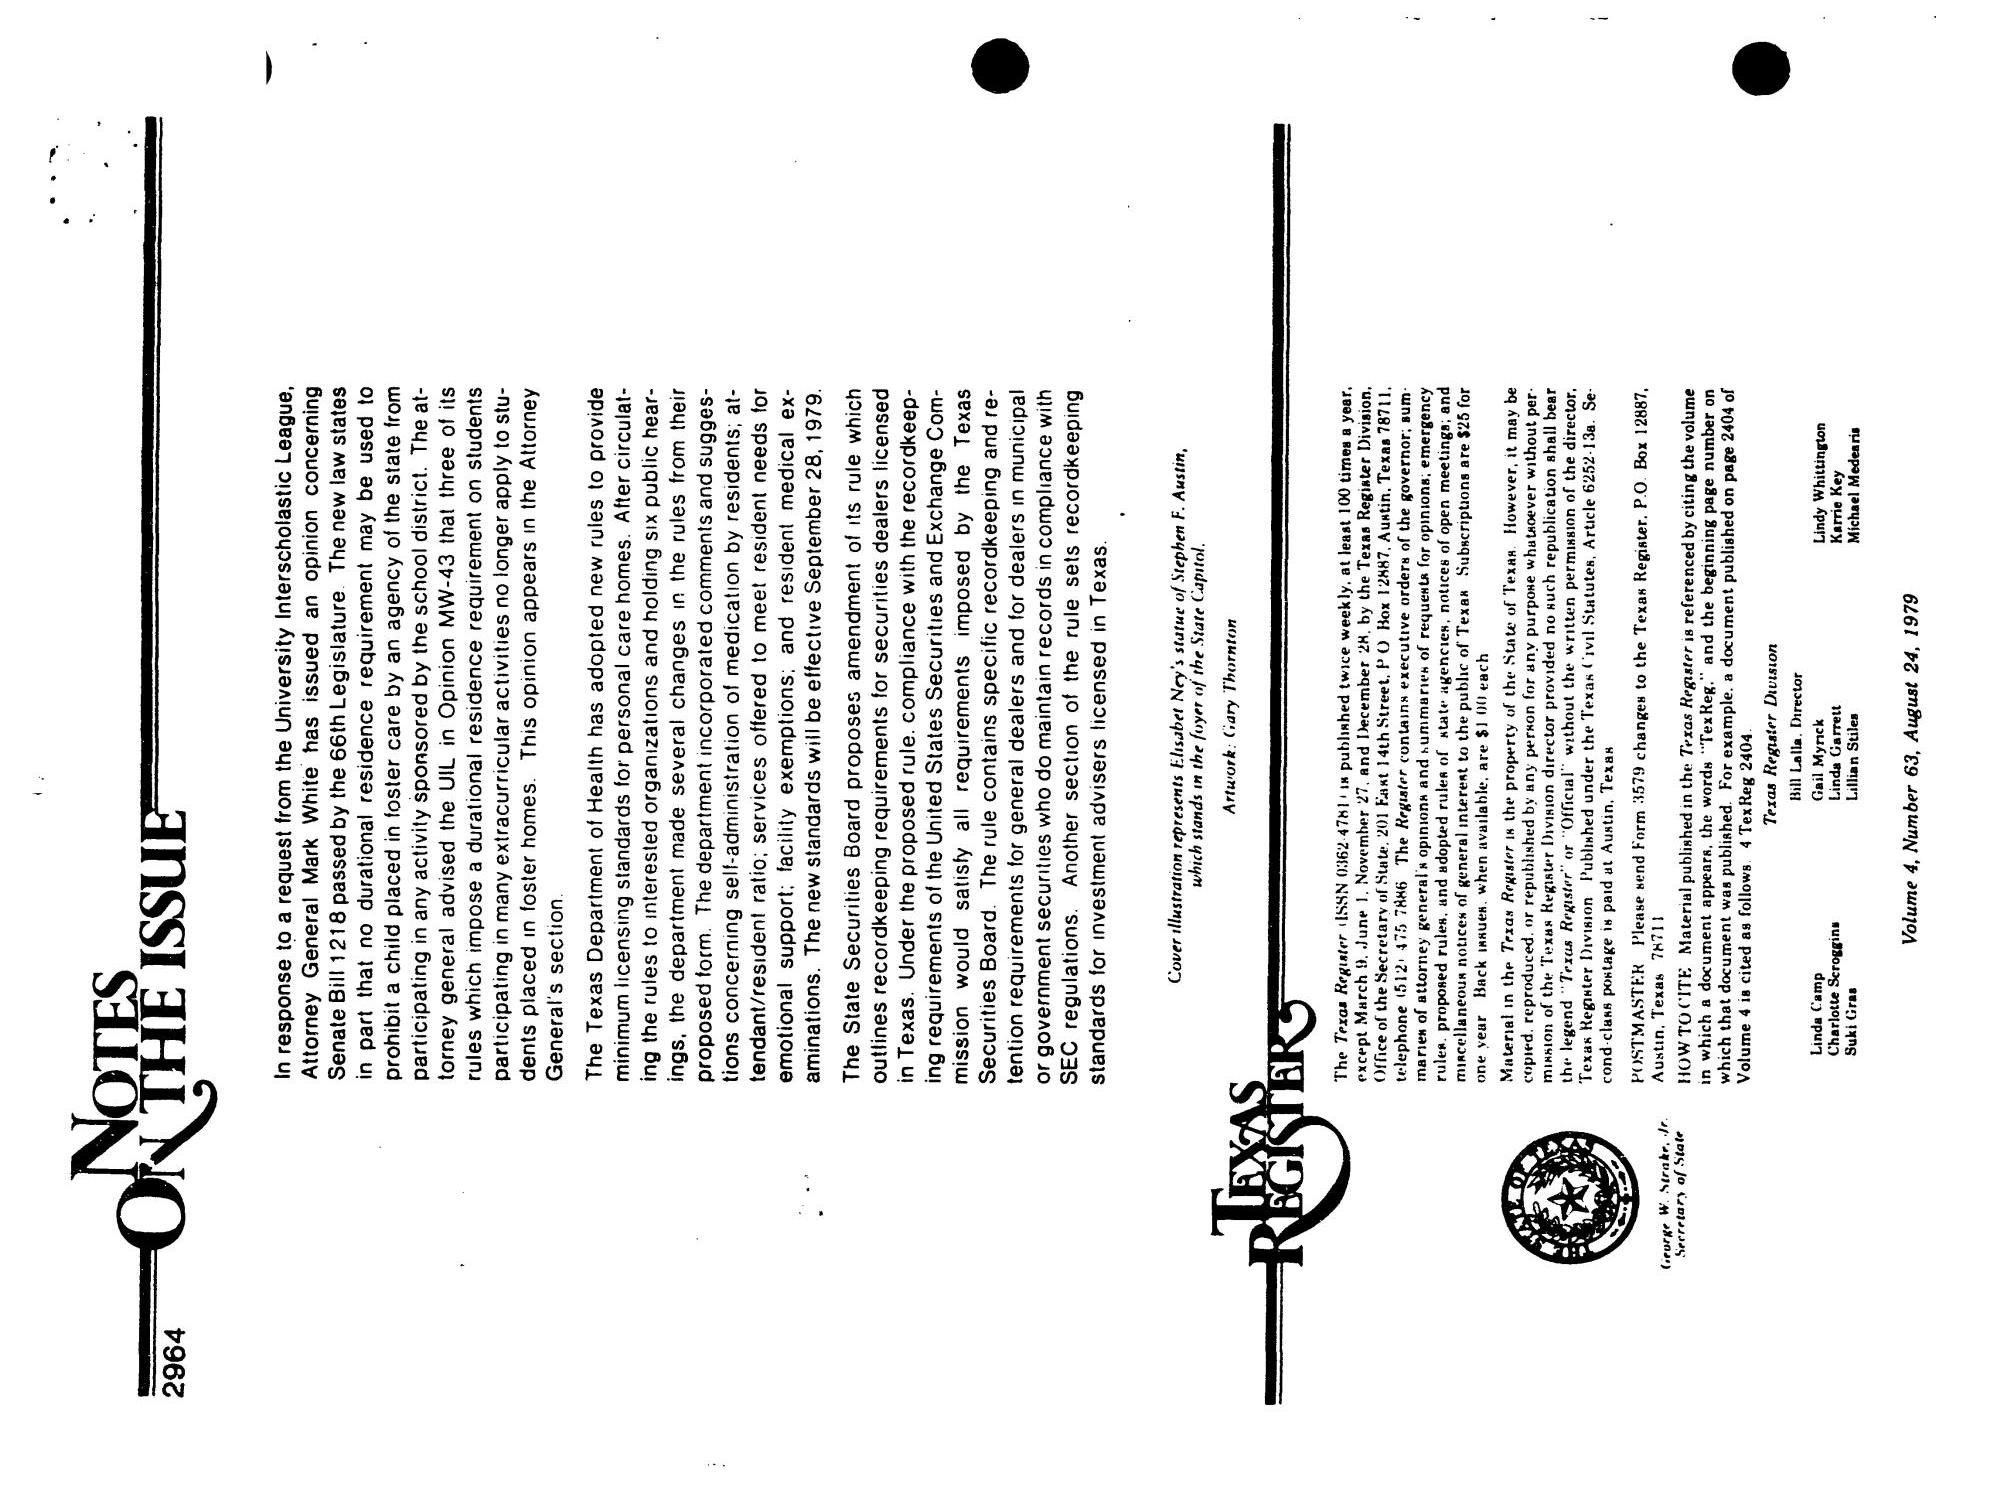 Texas Register, Volume 4, Number 63, Pages 2963-3028, August 24, 1979
                                                
                                                    2964
                                                